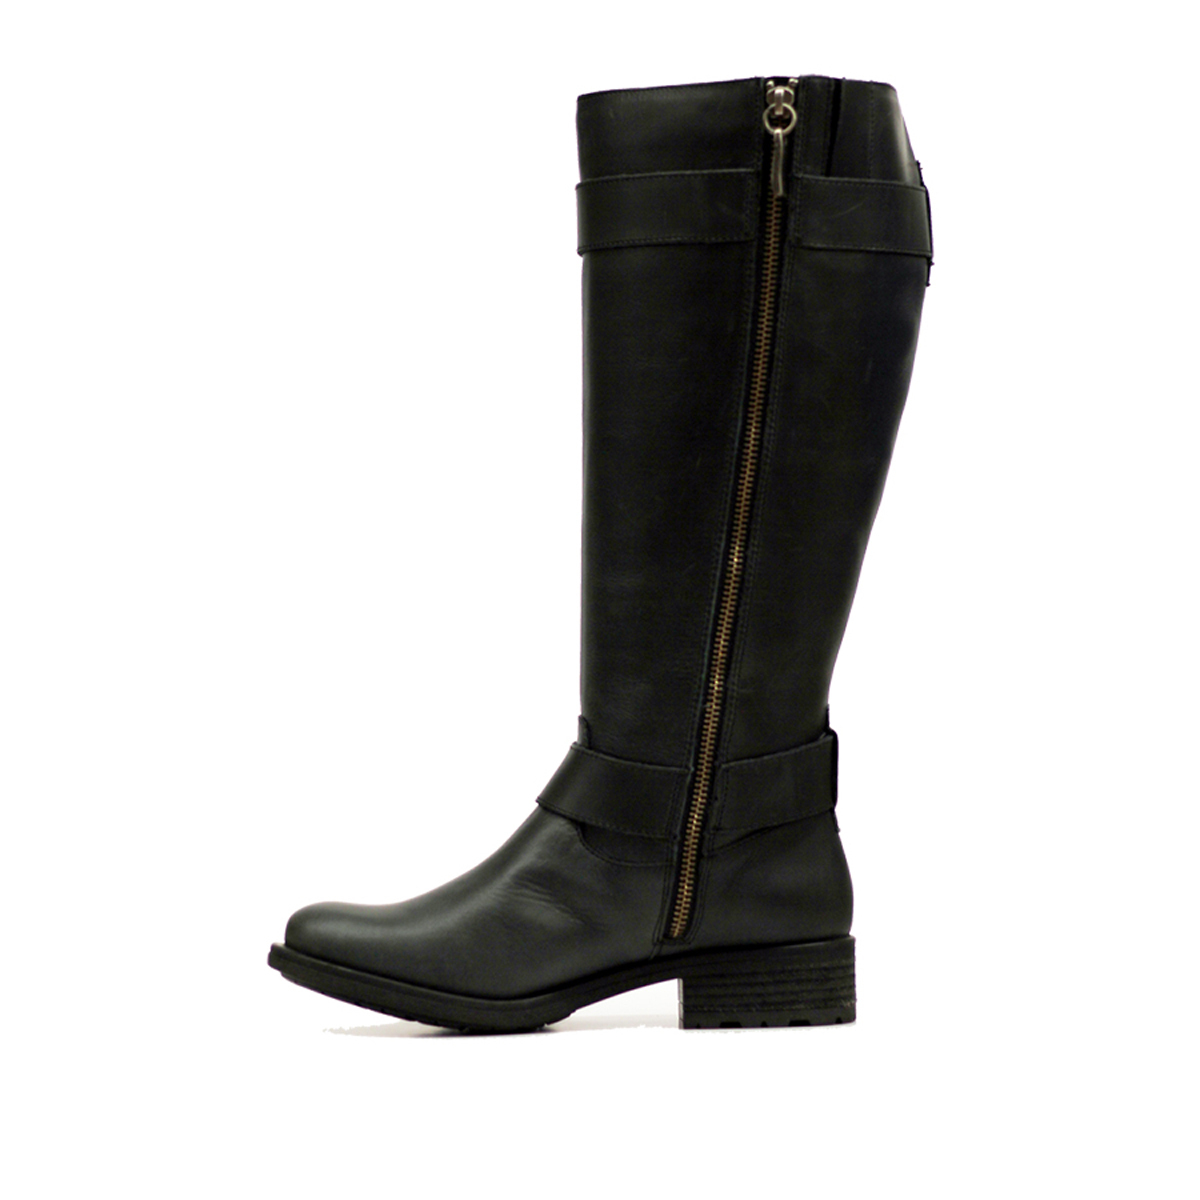 Vestiture Women's Navajo Black Extra Wide Calf Leather Riding Boot ...